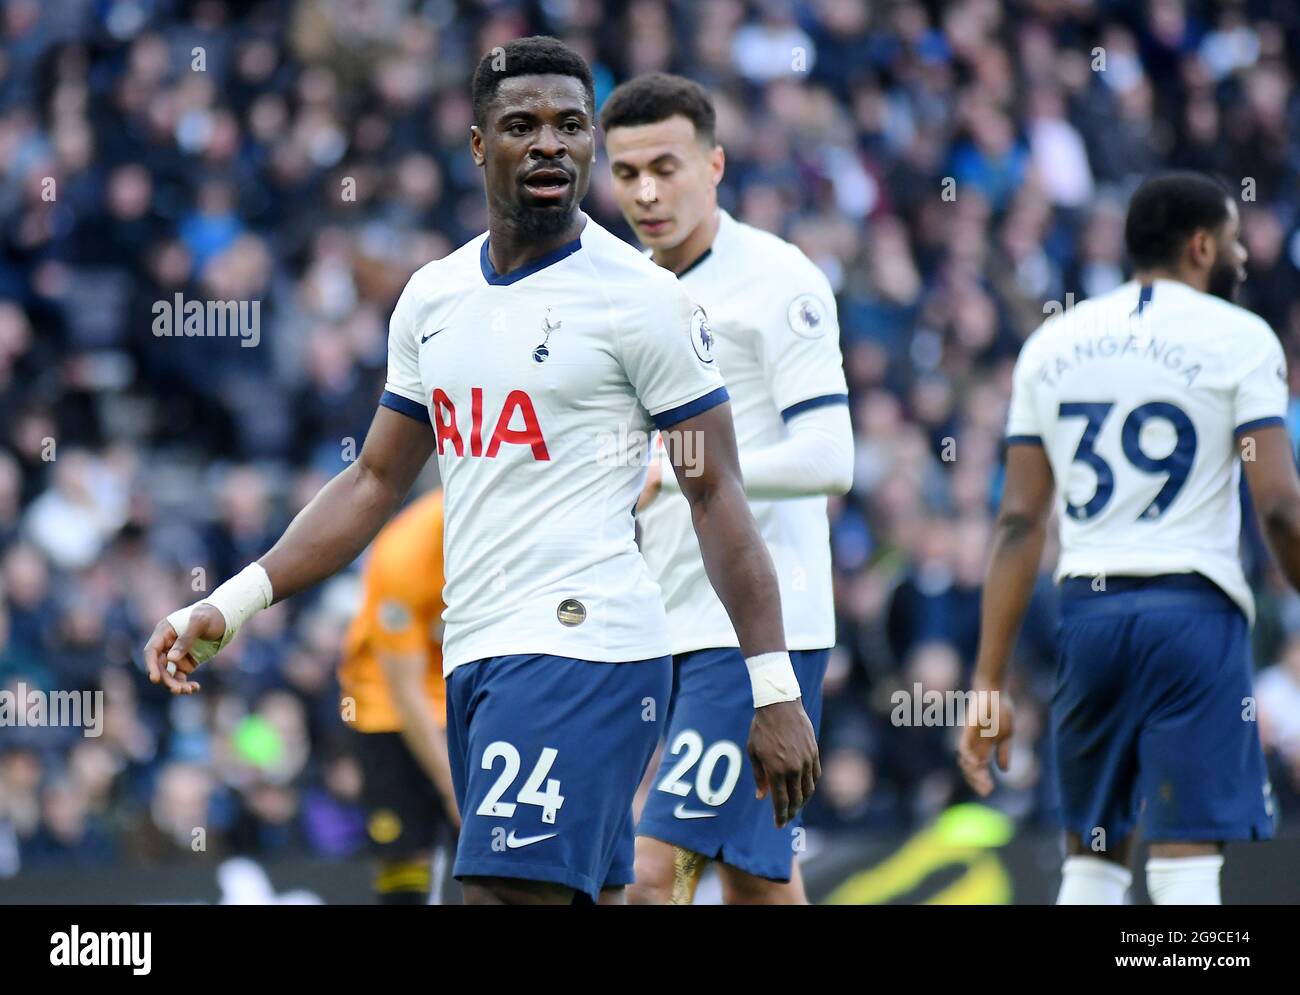 LONDON, ENGLAND - MArch 1, 2020: Serge Aurier of Tottenham pictured during the 2020/21 Premier League game between Tottenham Hotspur FC and Wolverhampton FC at Tottenham Hotspur Stadium. Stock Photo